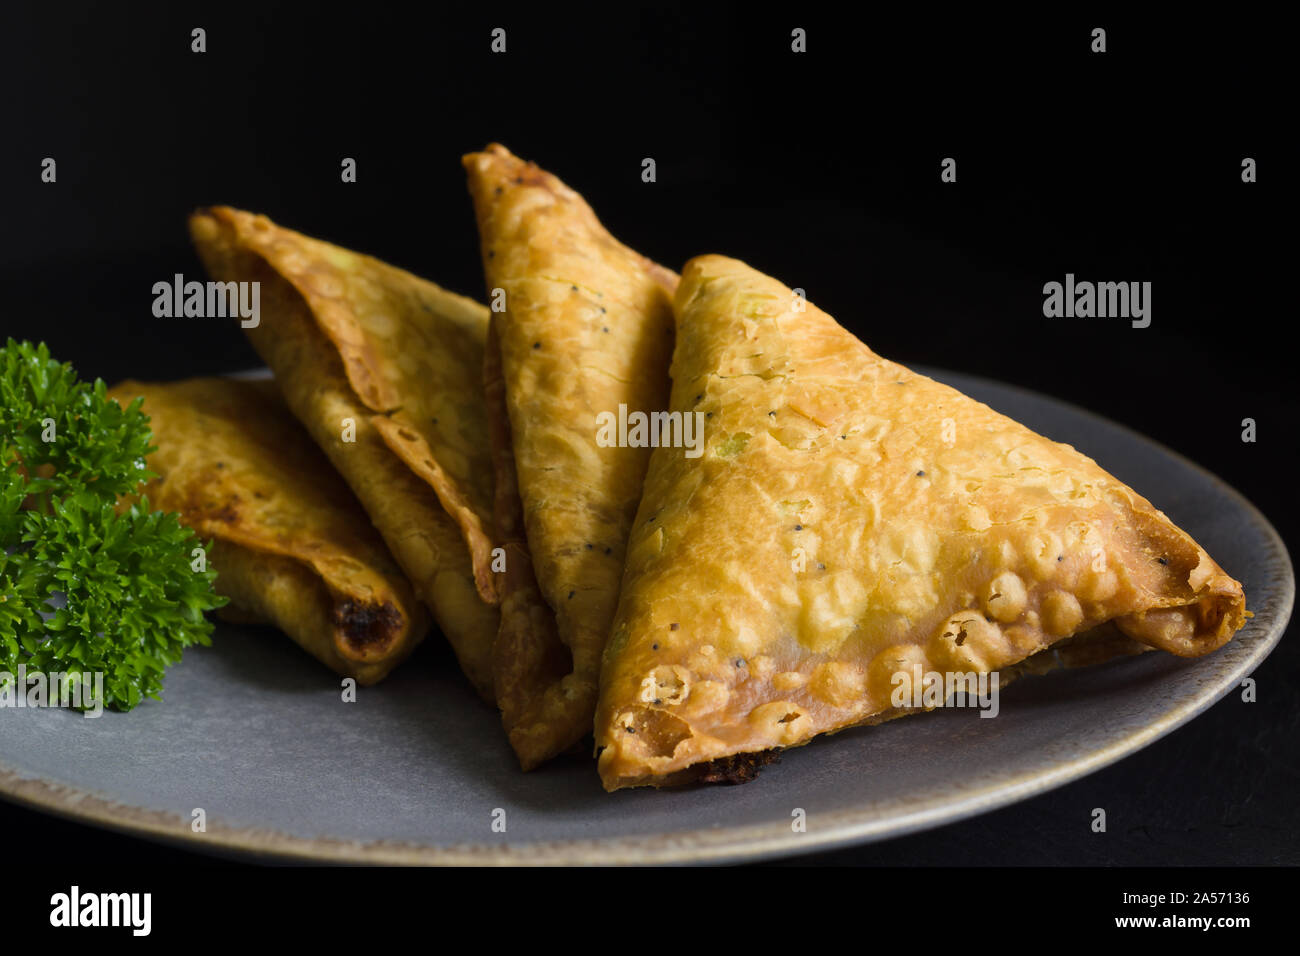 Samosas a spicy blend of vegetables or meat wrapped in a deep fried triangular pastry parcel a popular snack in the Middle East and South Asia Stock Photo